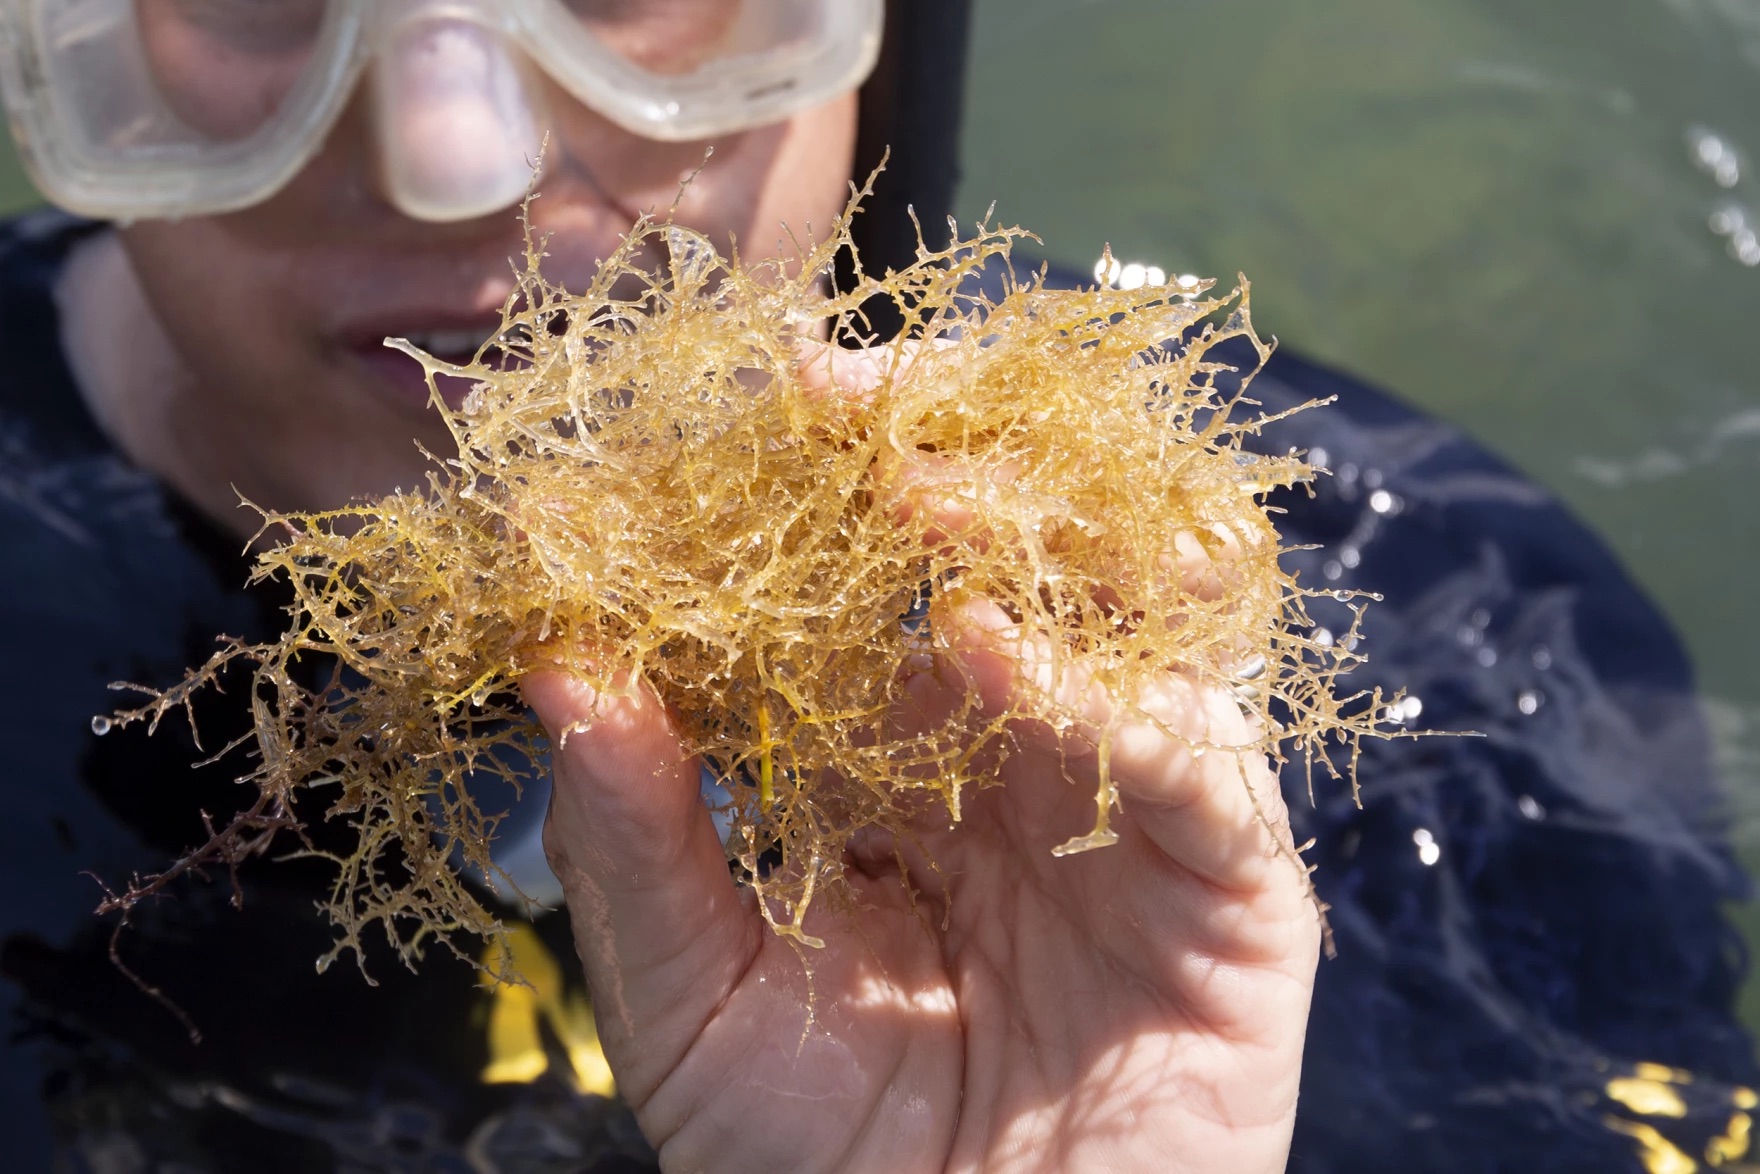 a diver wearing goggles and a wetsuit holds up a clump of stringy yellow seagrass, which looky slightly spikier than regular grass